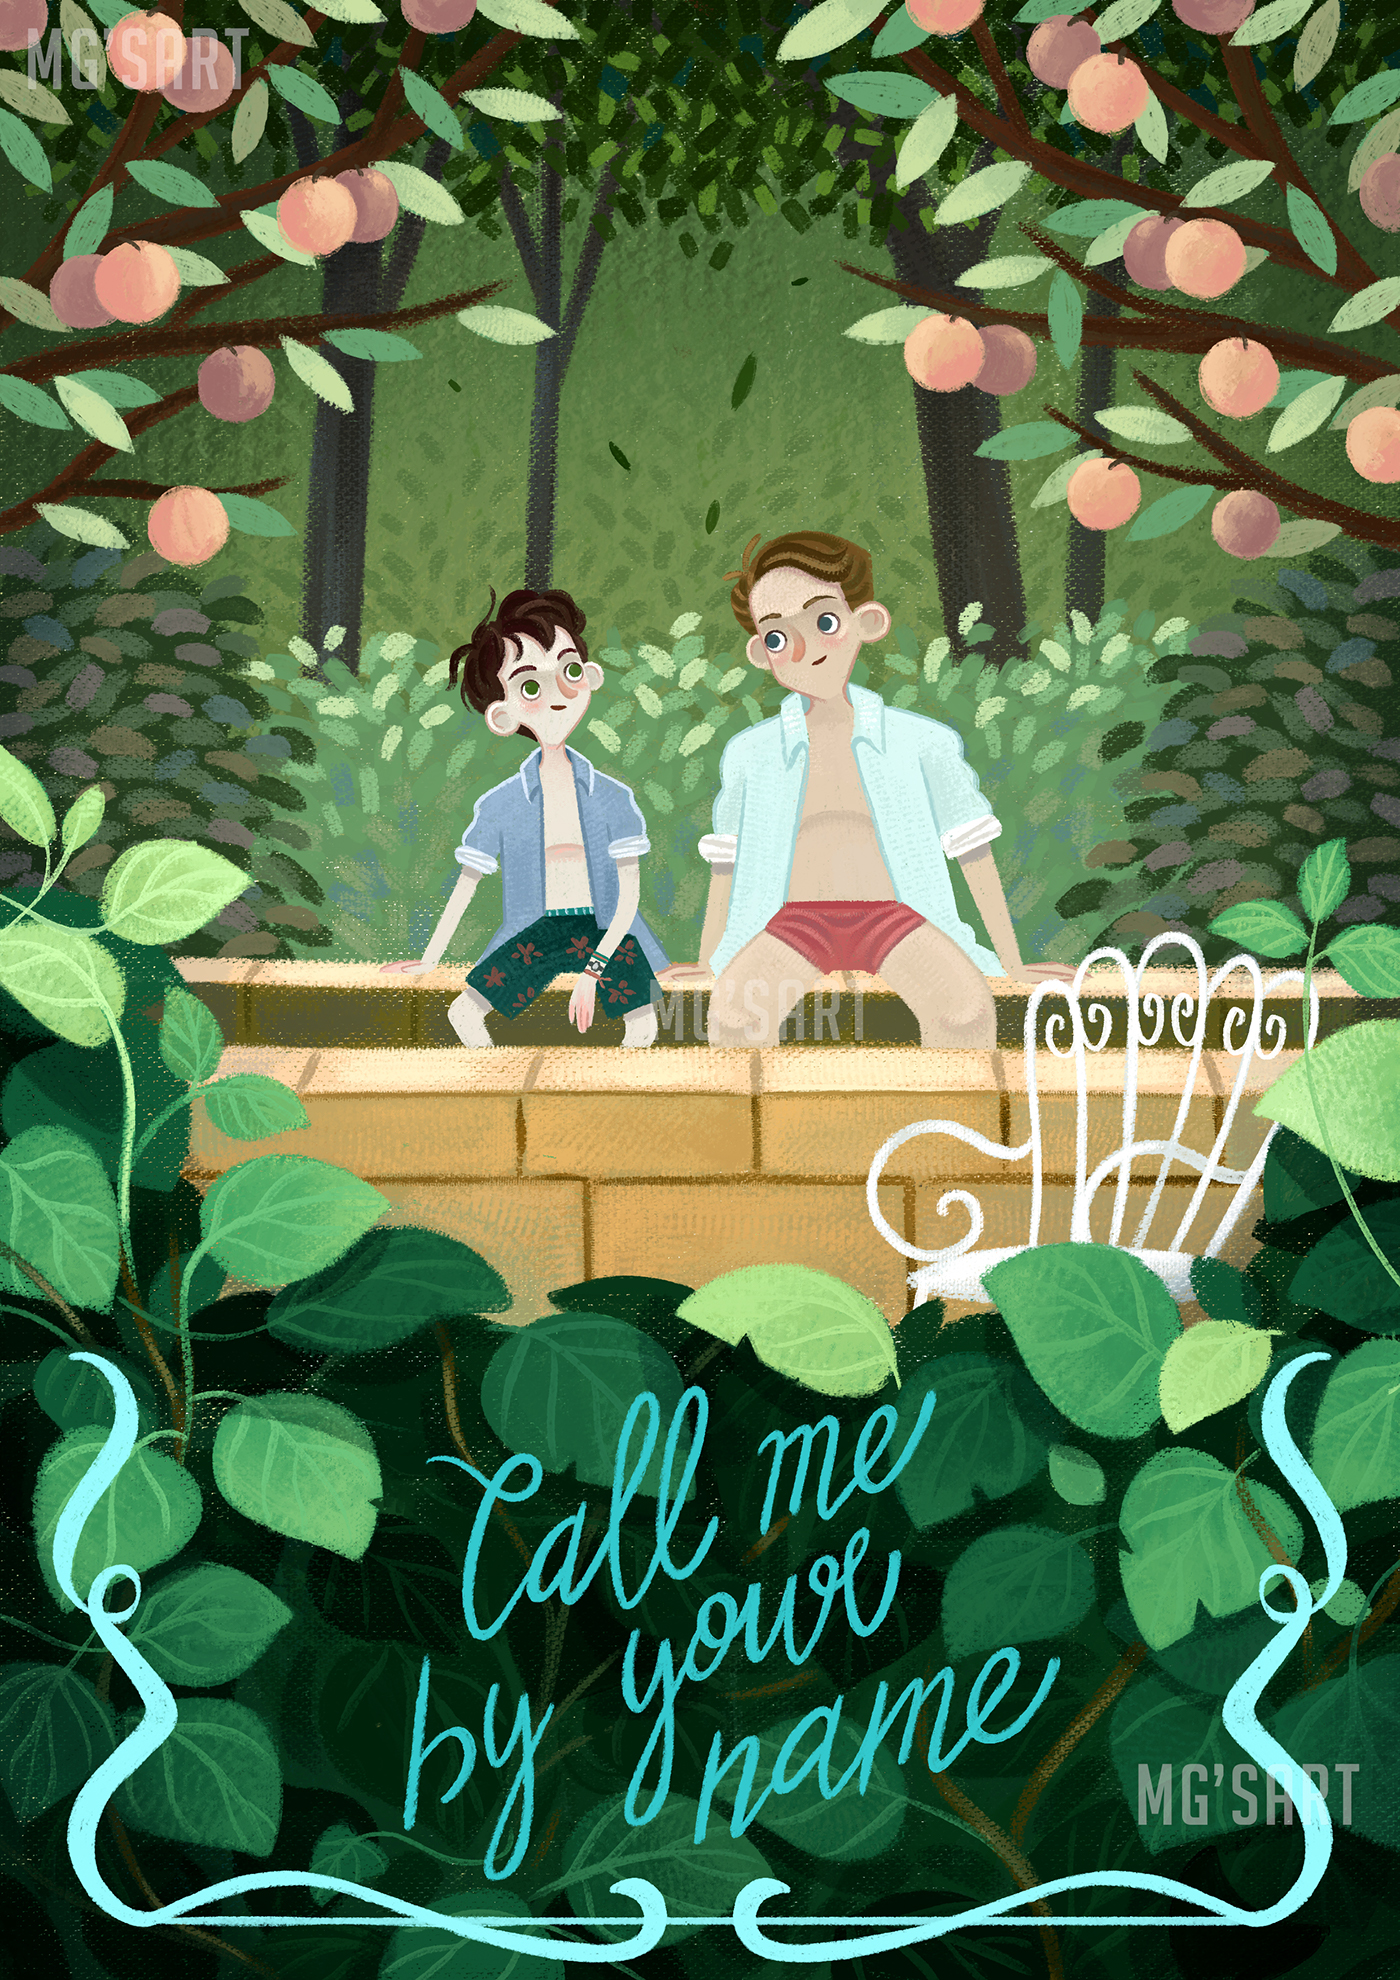 mgbrushes call me by cmbyn ILLUSTRATION  Digital Art  gay summer